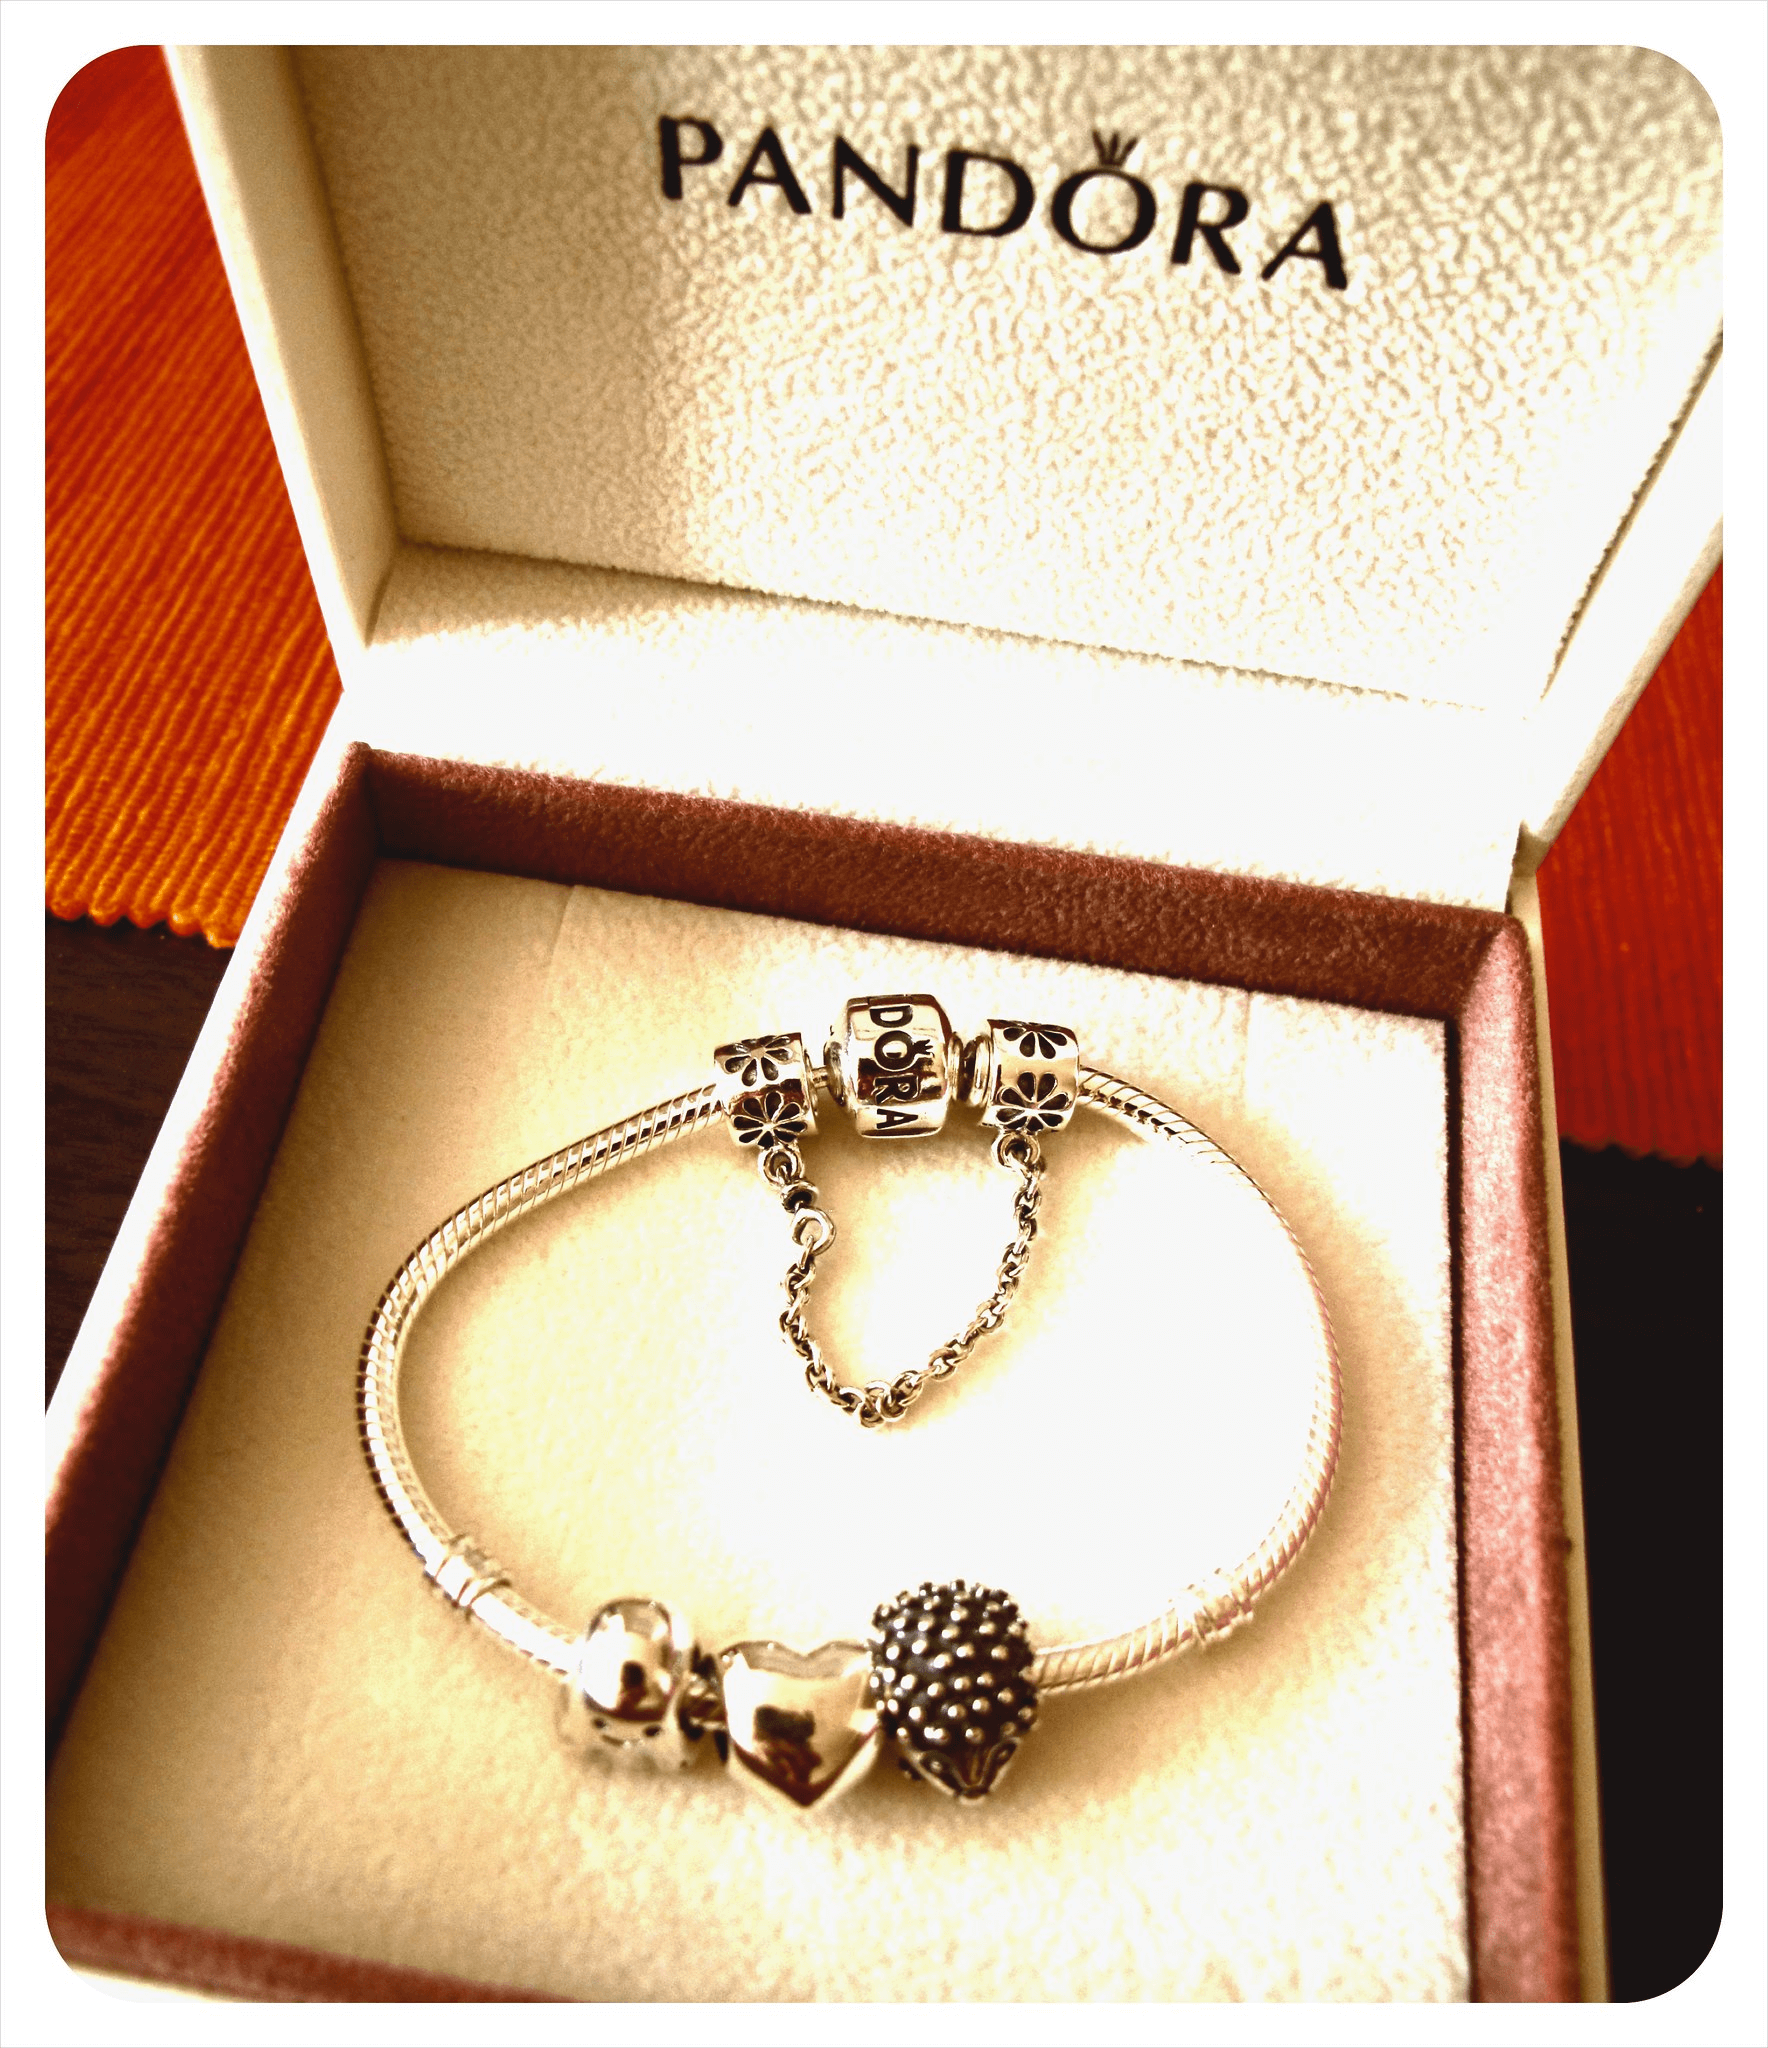 Pandora Charms Sale: Are They Worth It?